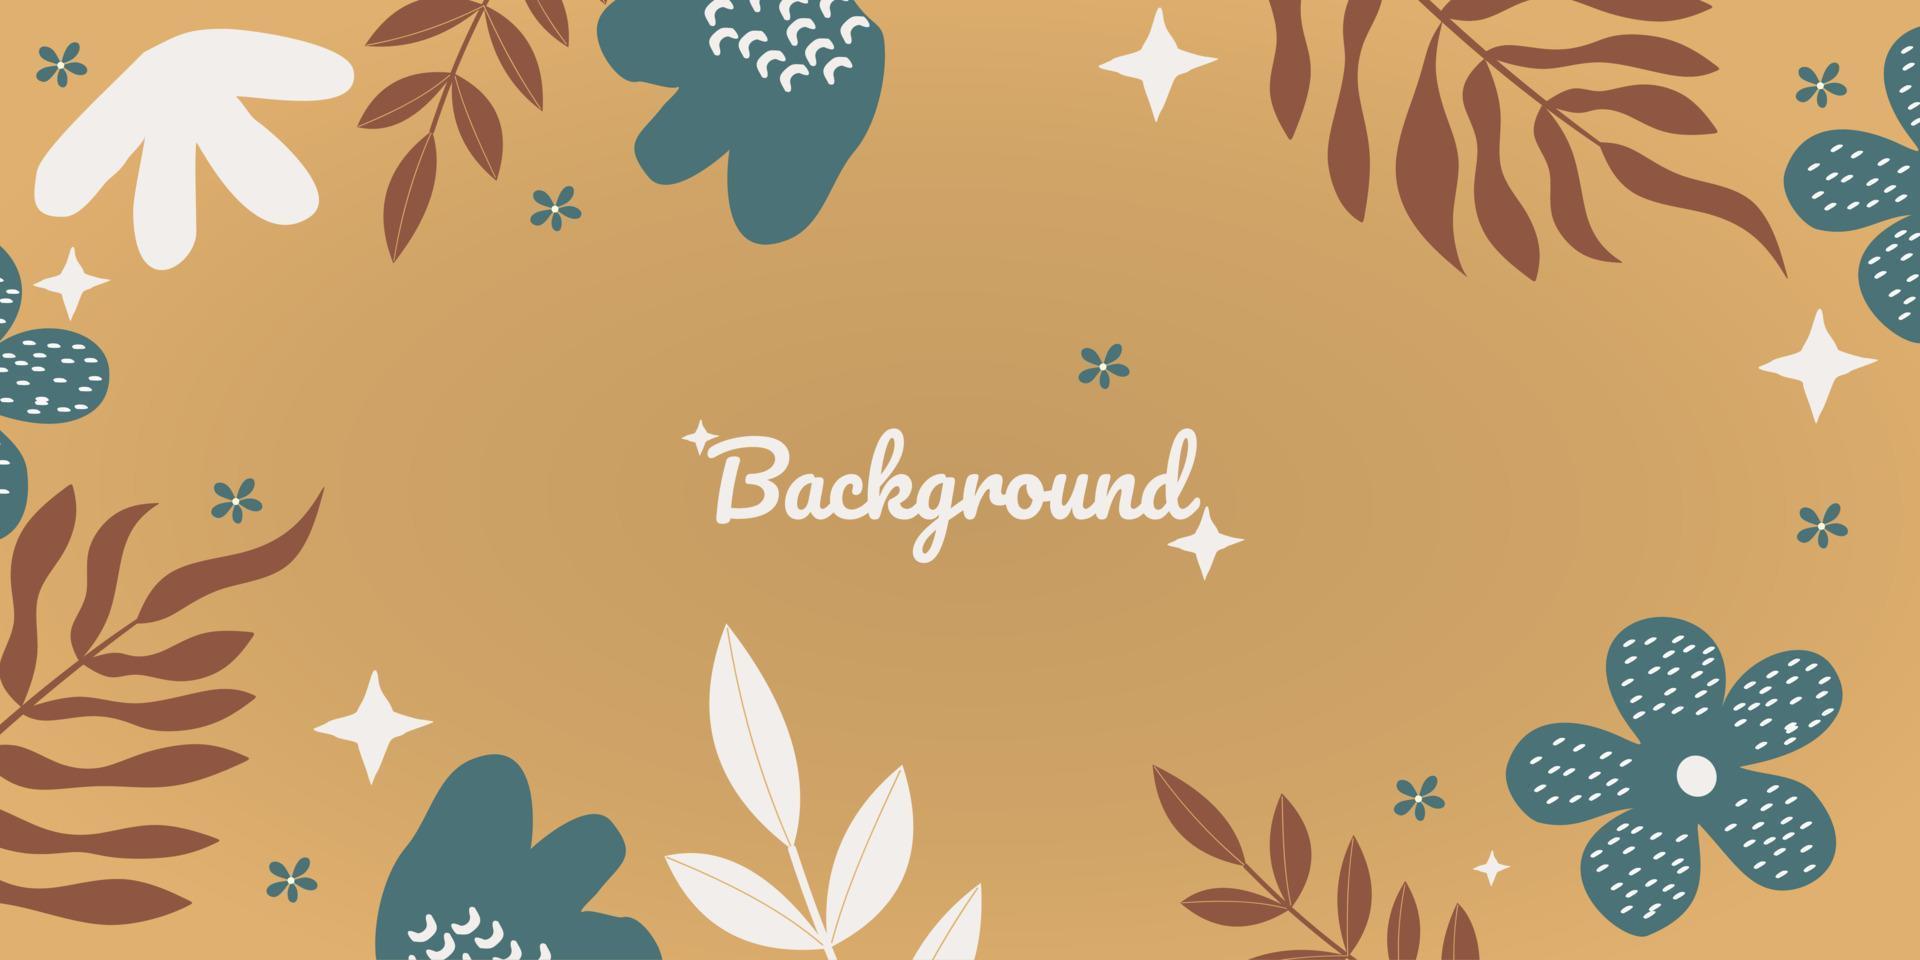 Creative universal artistic floral background. Hand Drawn doodle textures. Trendy Graphic Design for banner, cover, invitation, poster, card, placard, brochure or header vector